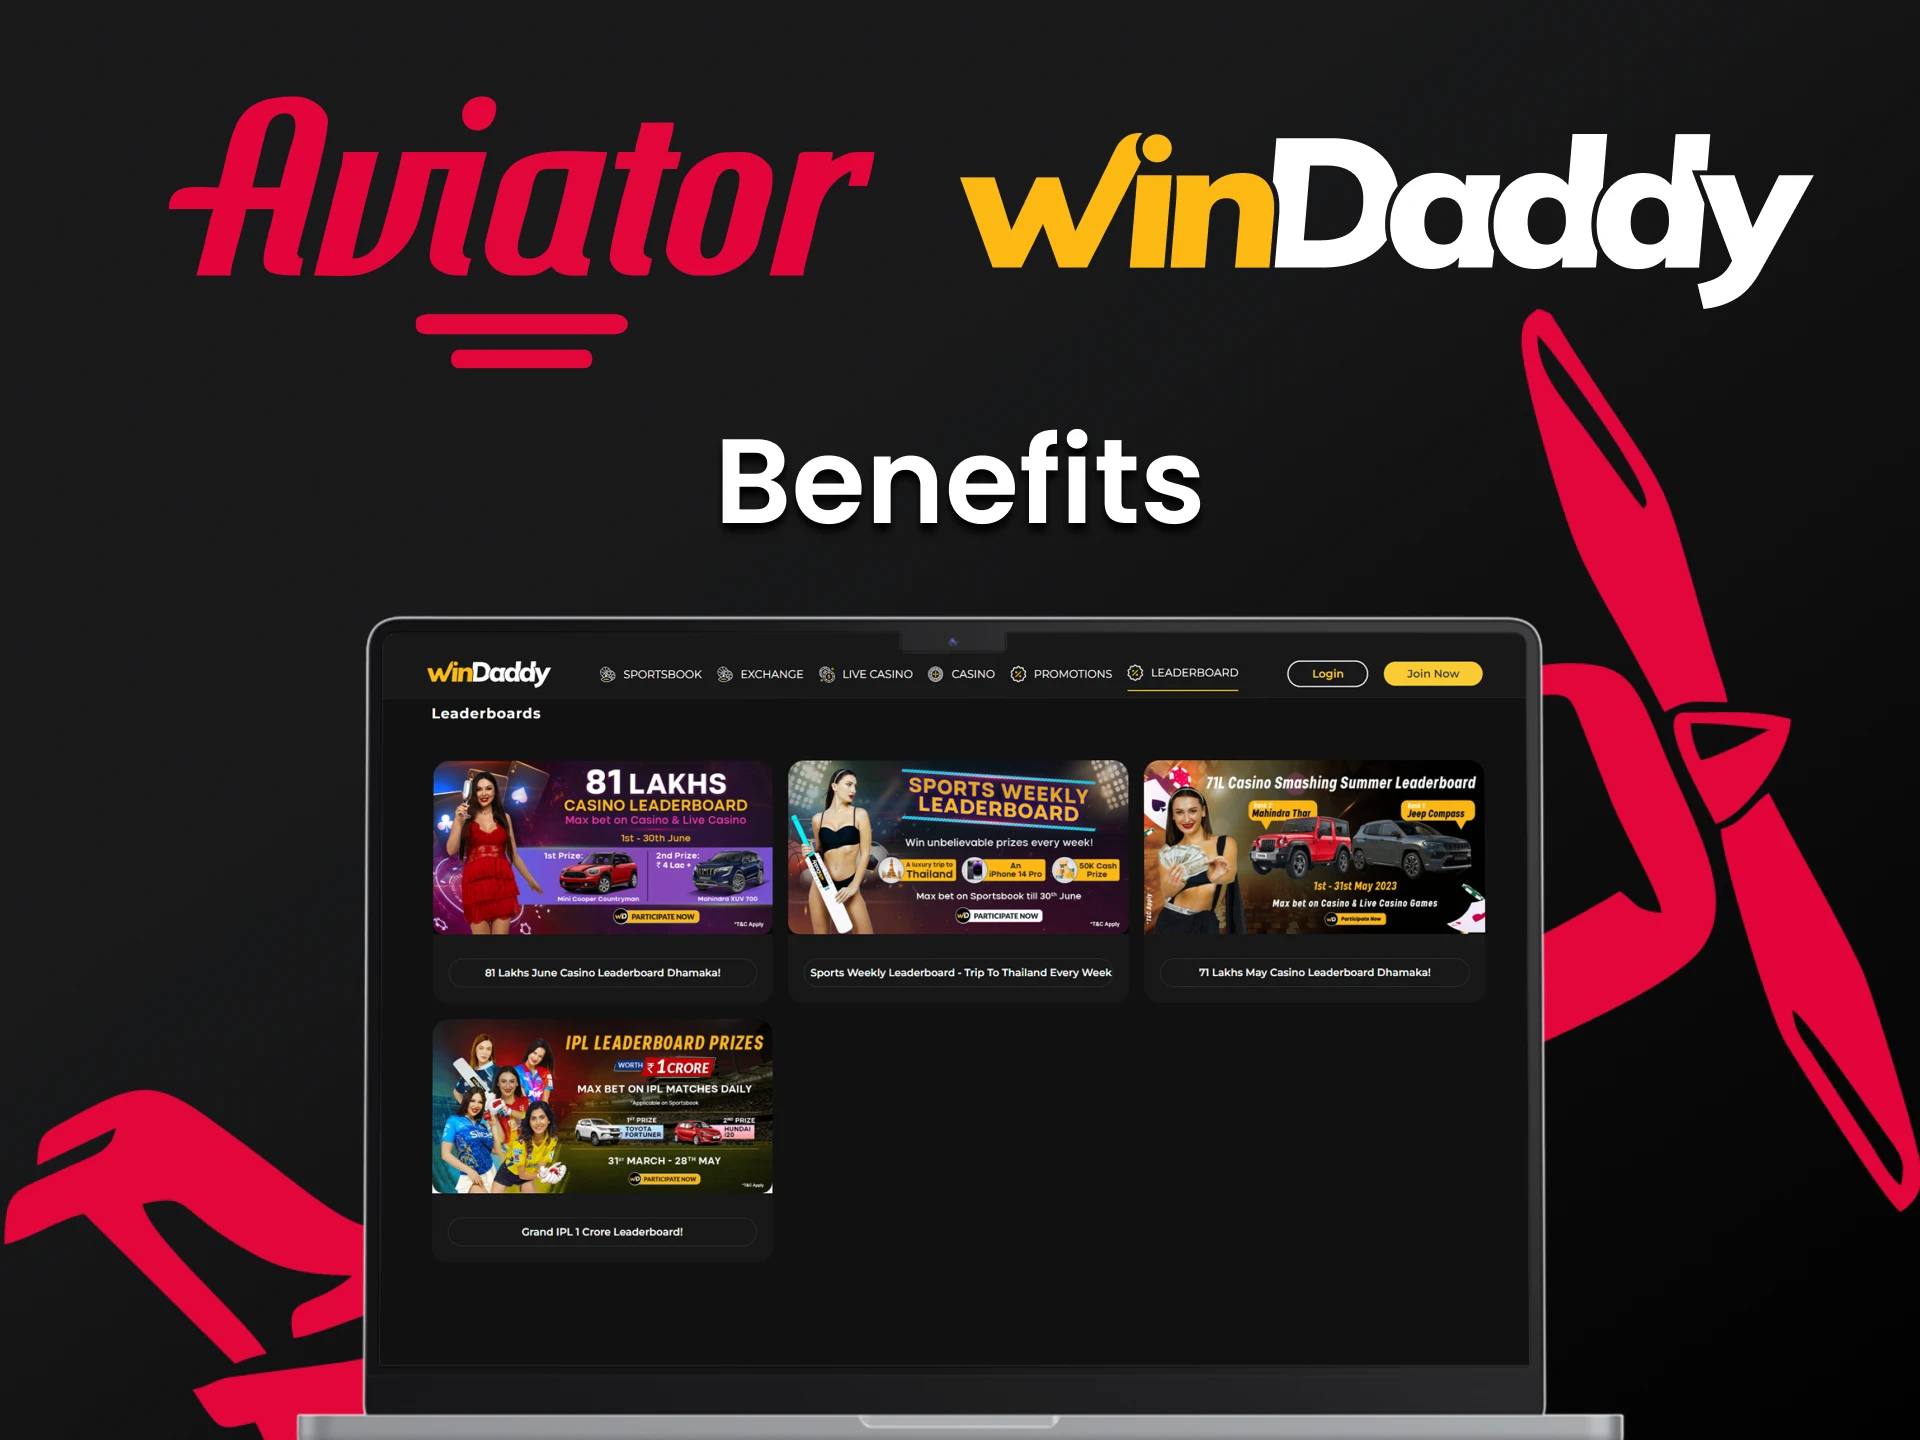 Get the benefits of playing Aviator on WinDaddy.